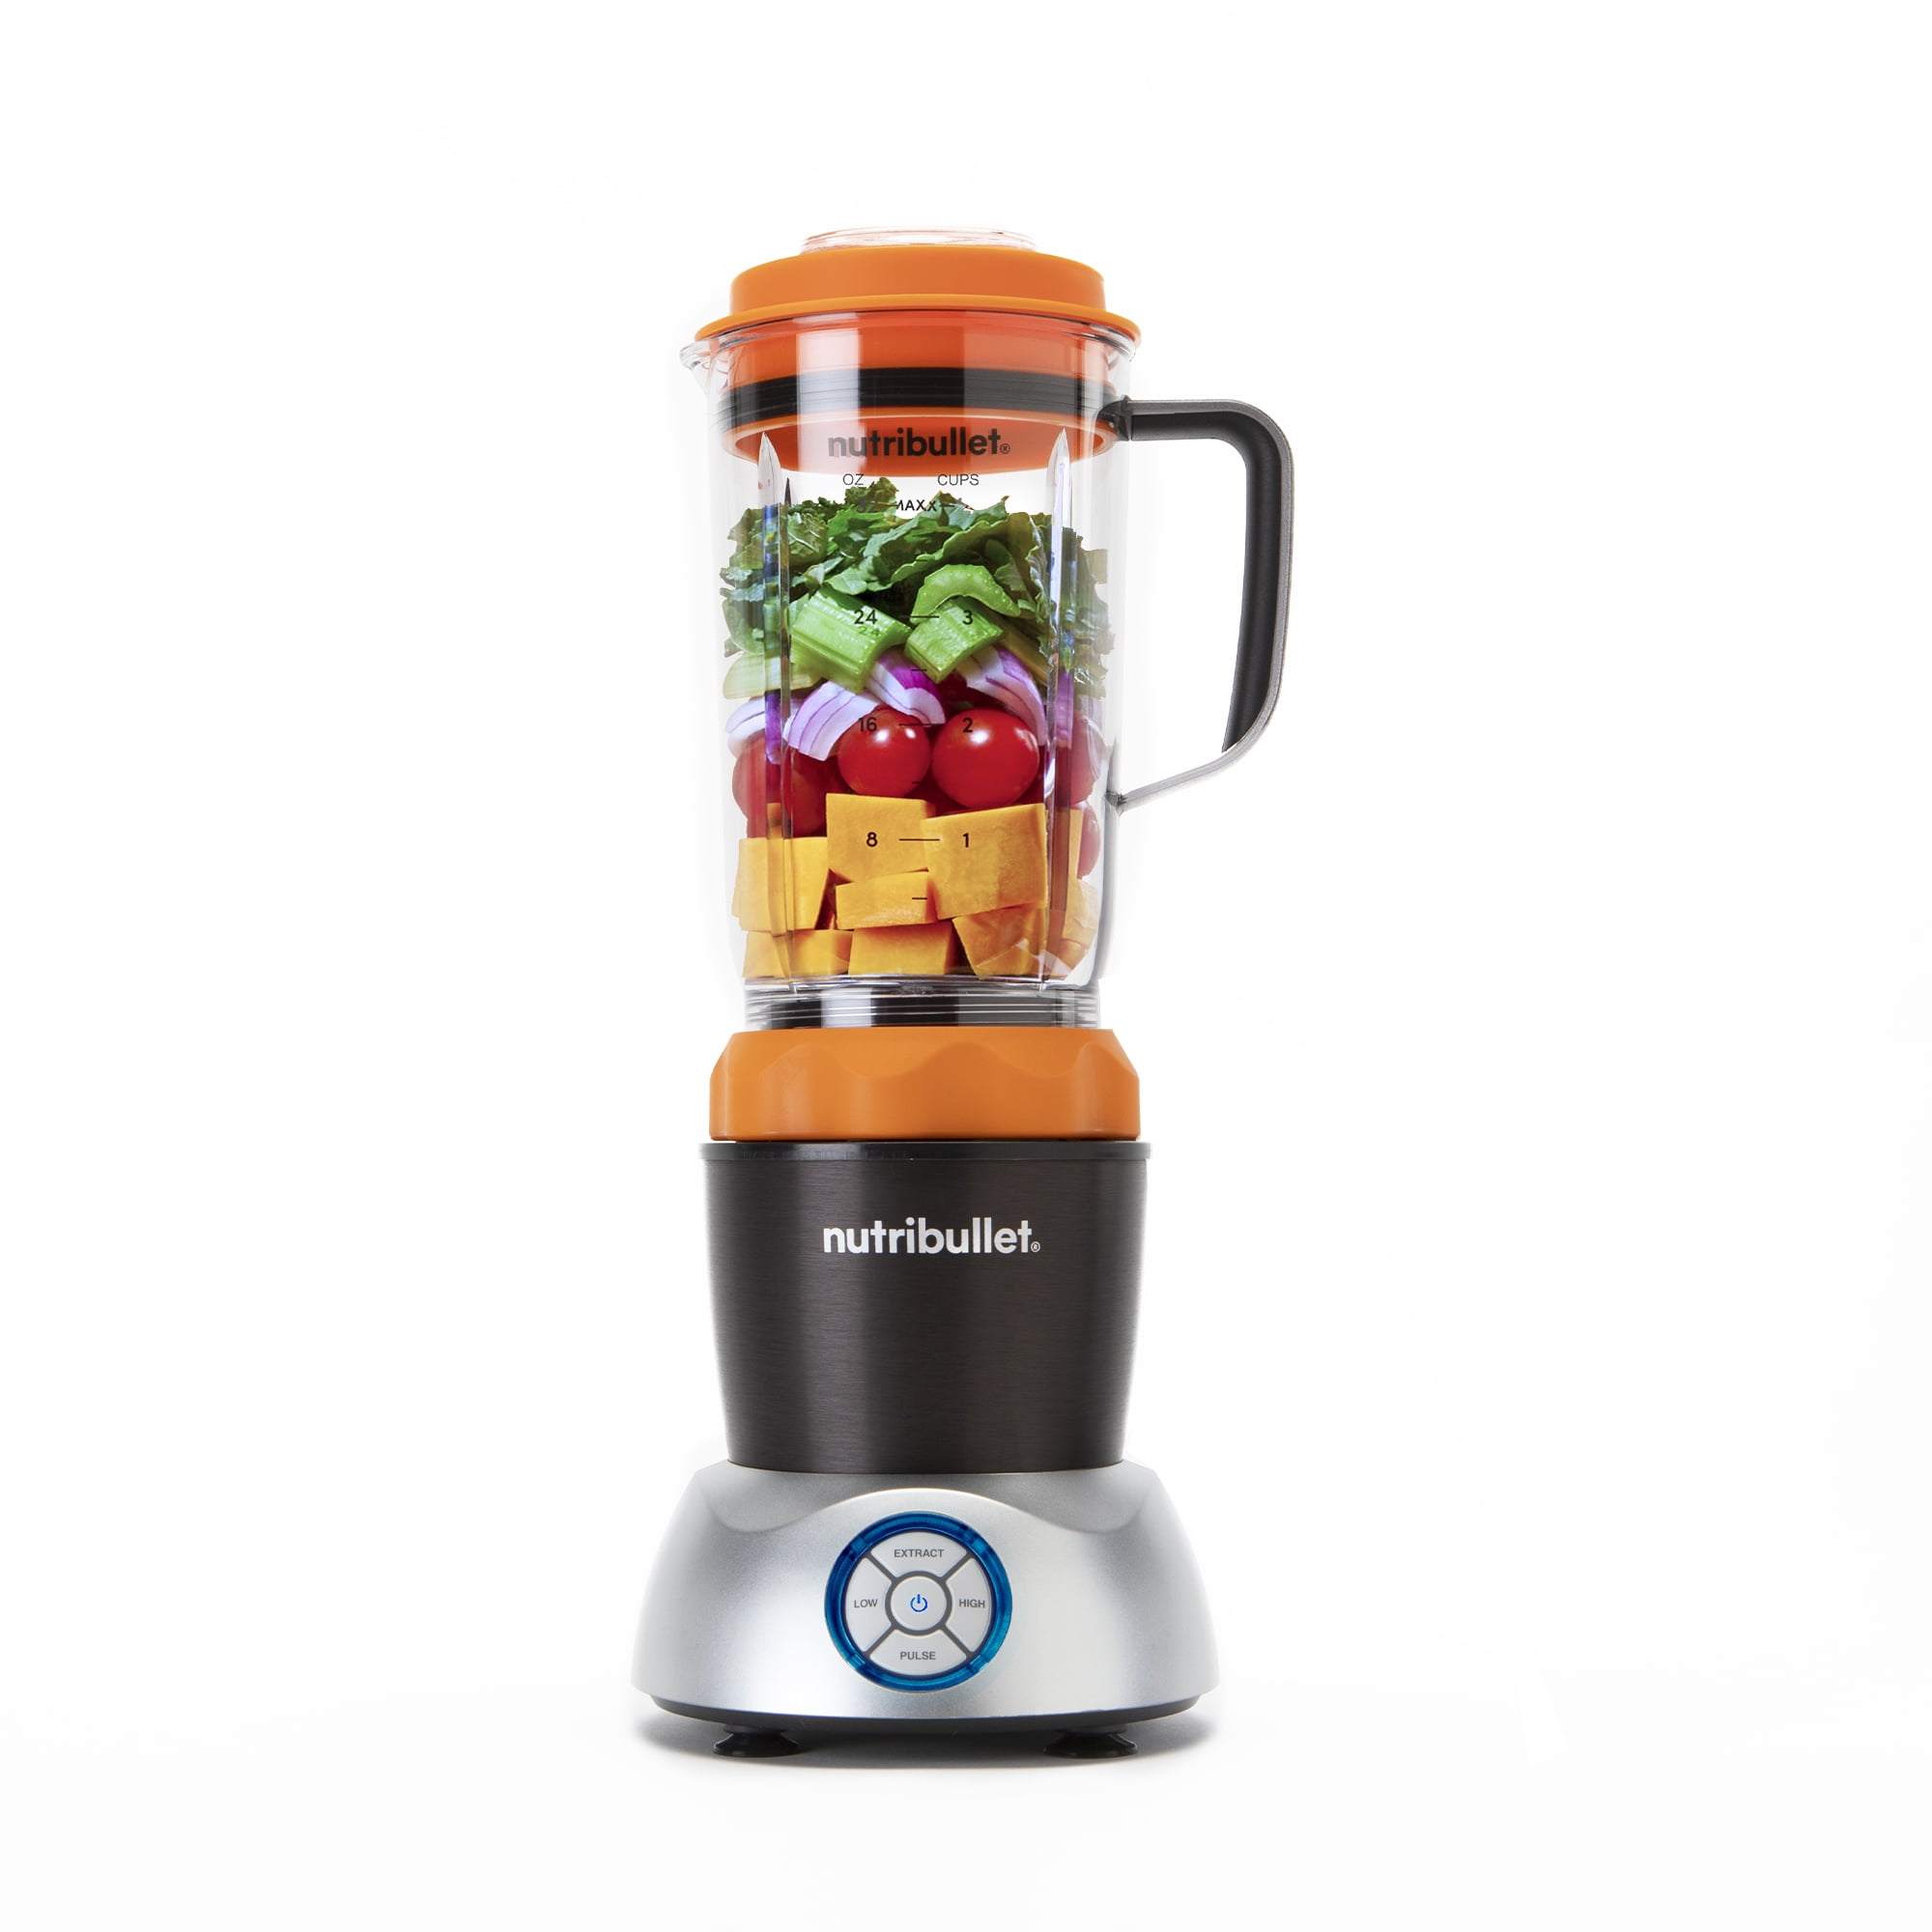 Best Blender For Nuts And Seeds - Food Plus Words